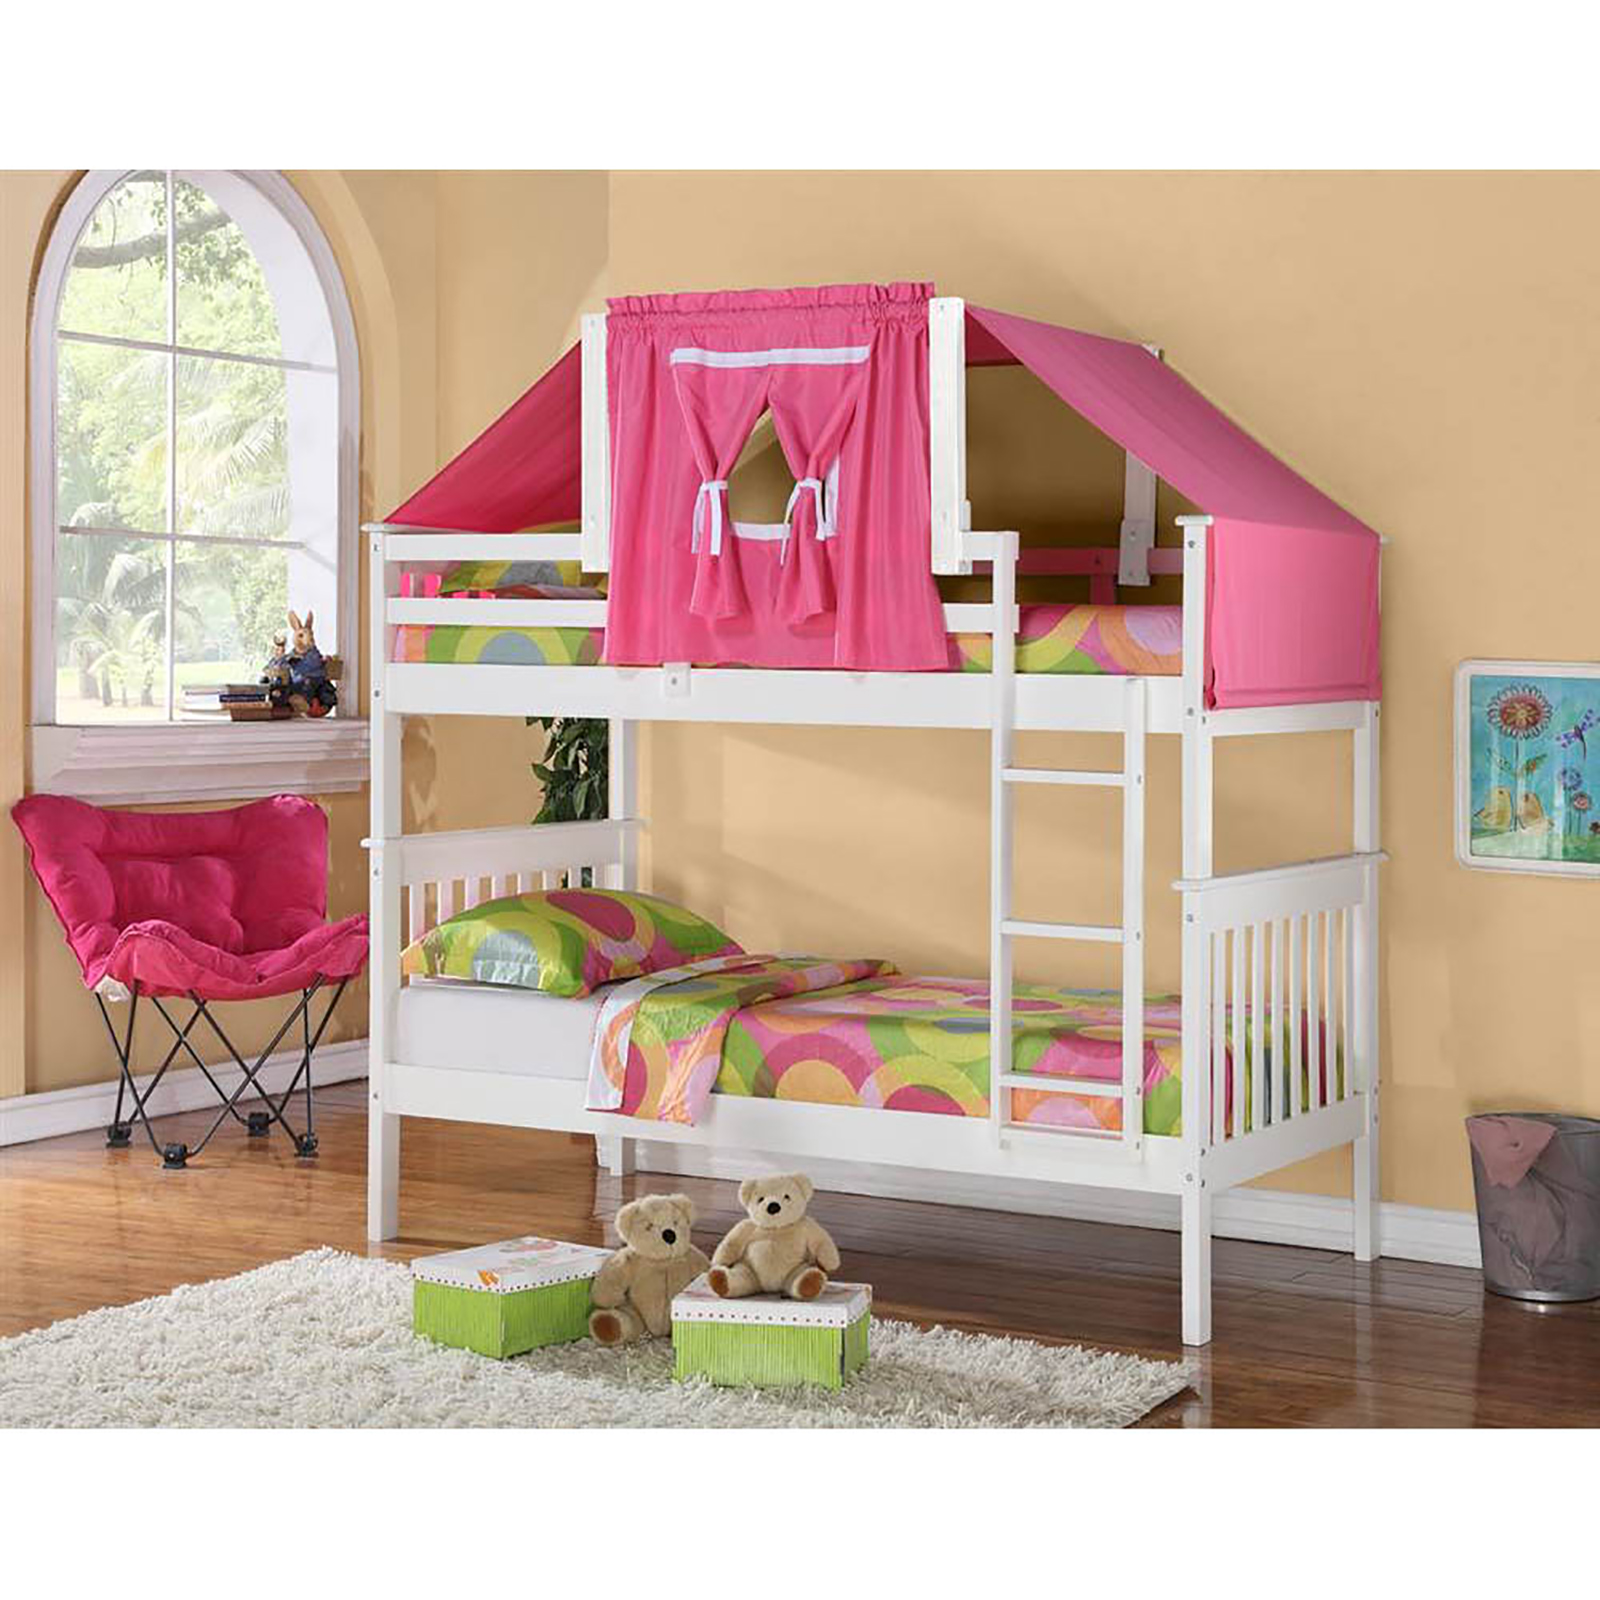 DONCO kids Twin Over Twin Mission Bunk Bed w/ Tent Kit - White and Pink